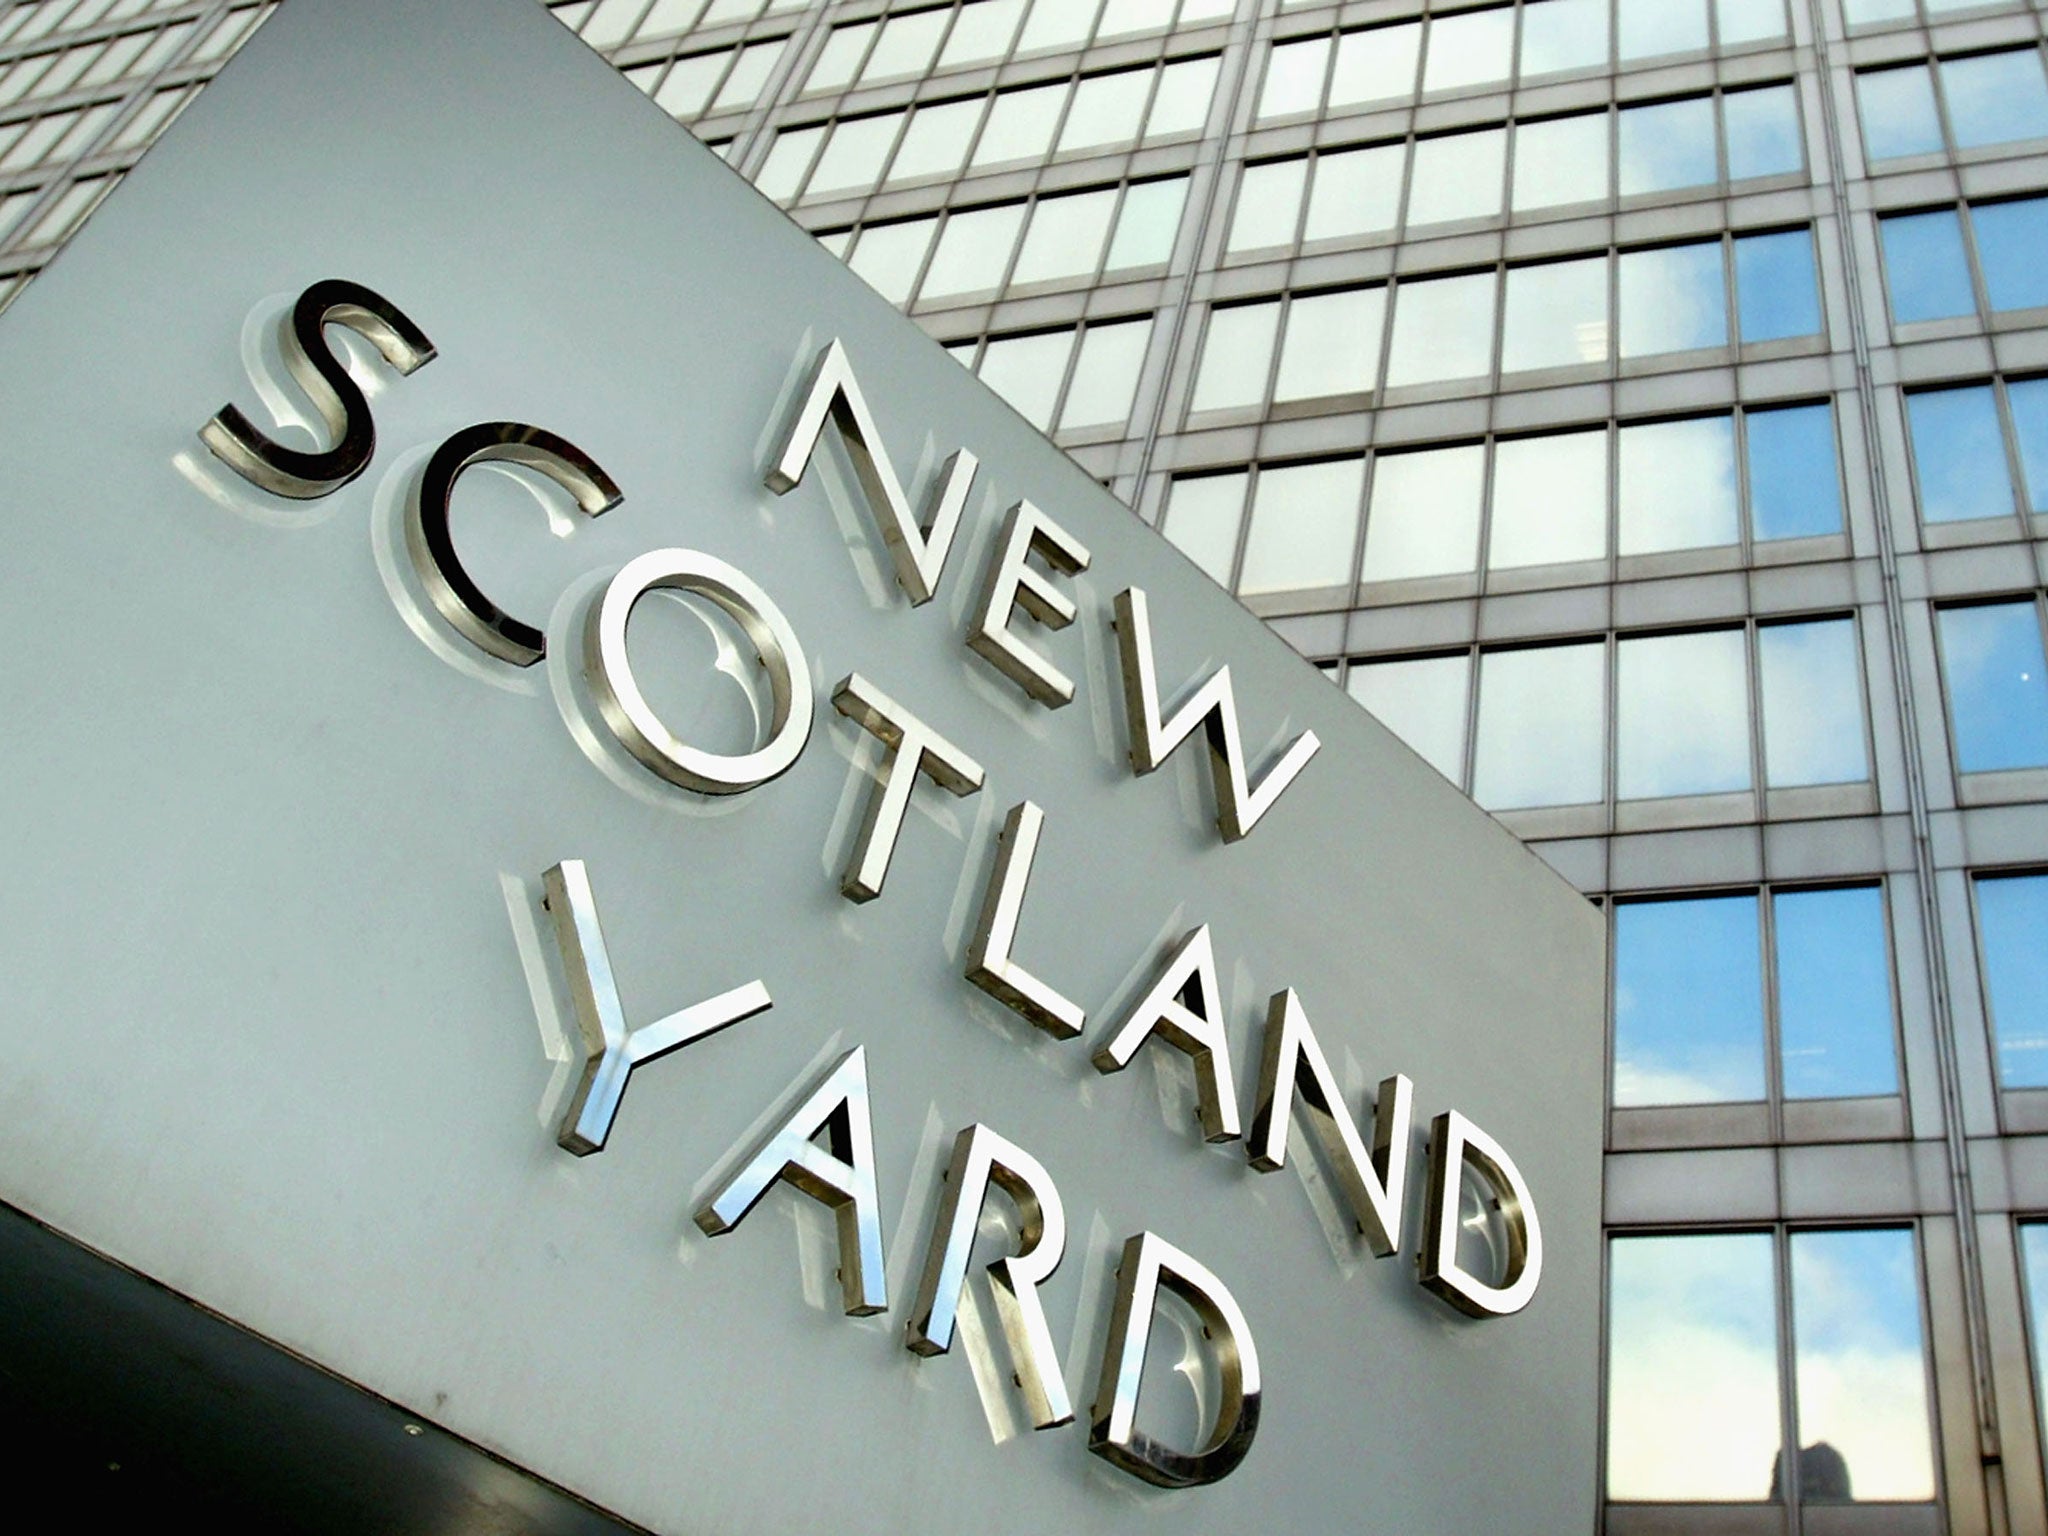 Two former Scotland Yard Commissioners have been asked to explain their knowledge surrounding the destruction of a “lorry-load” of top-secret files